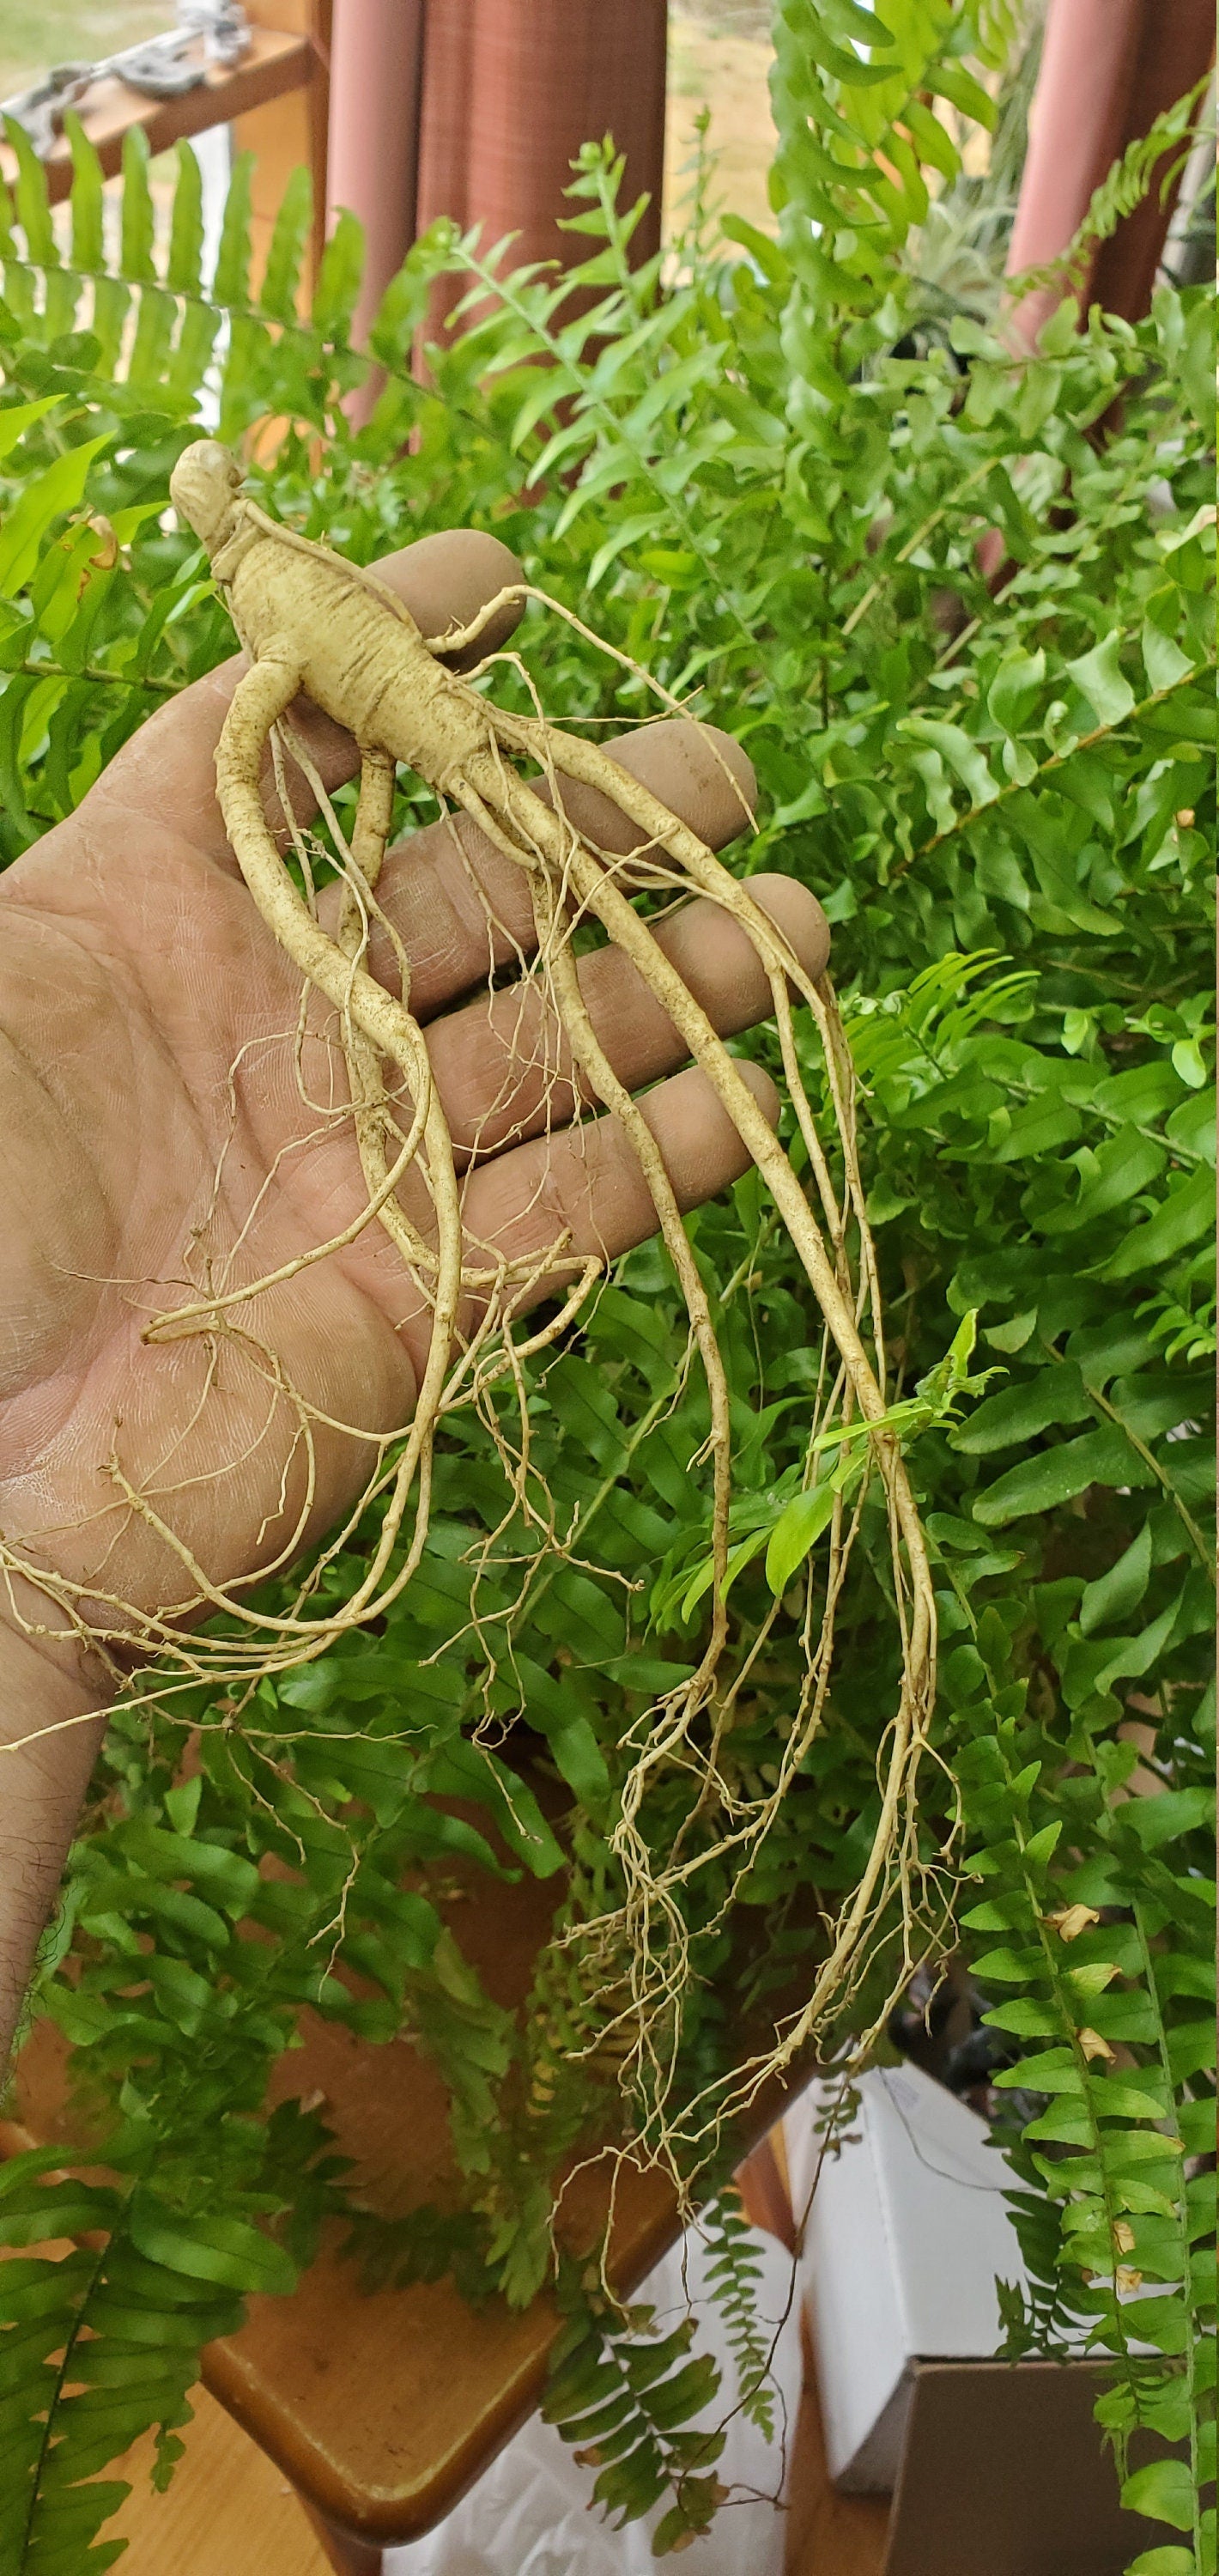 American Ginseng Roots (Panax quinquefolius), Dormant 3 year old